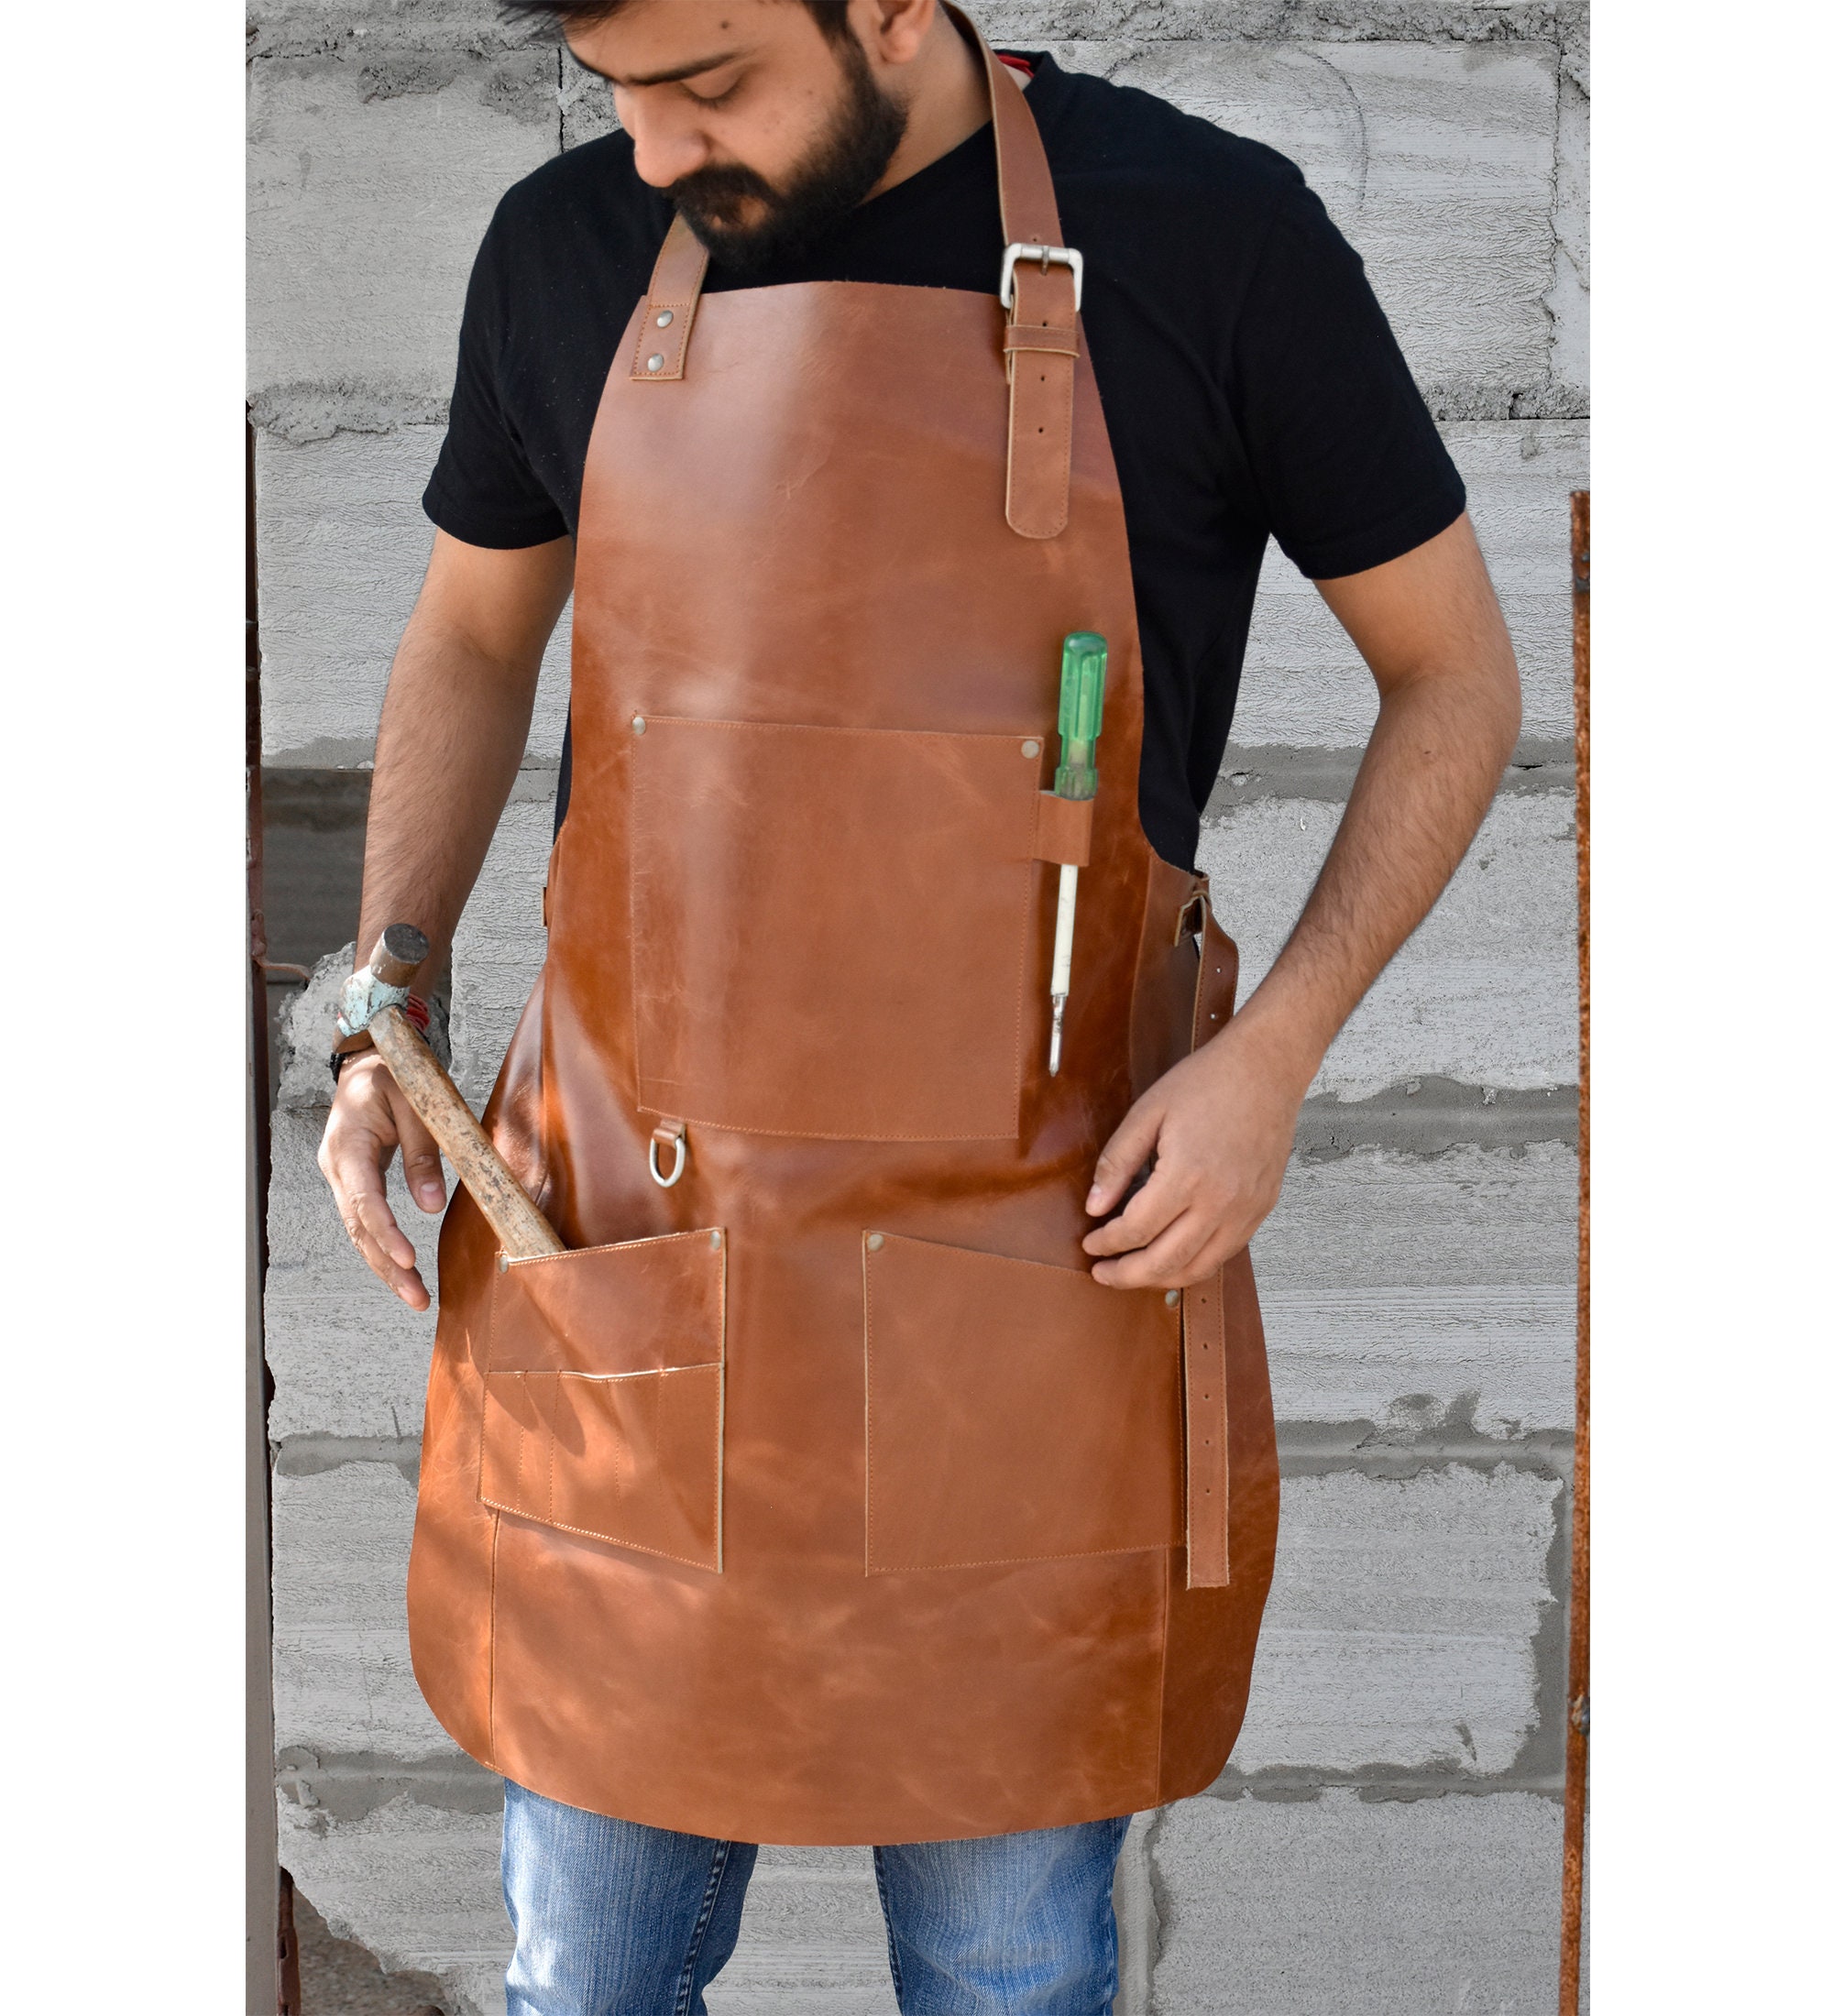 Care Bears Leather Apron For Men Personalized Blacksmith Woodworking With Pockets A Quality 